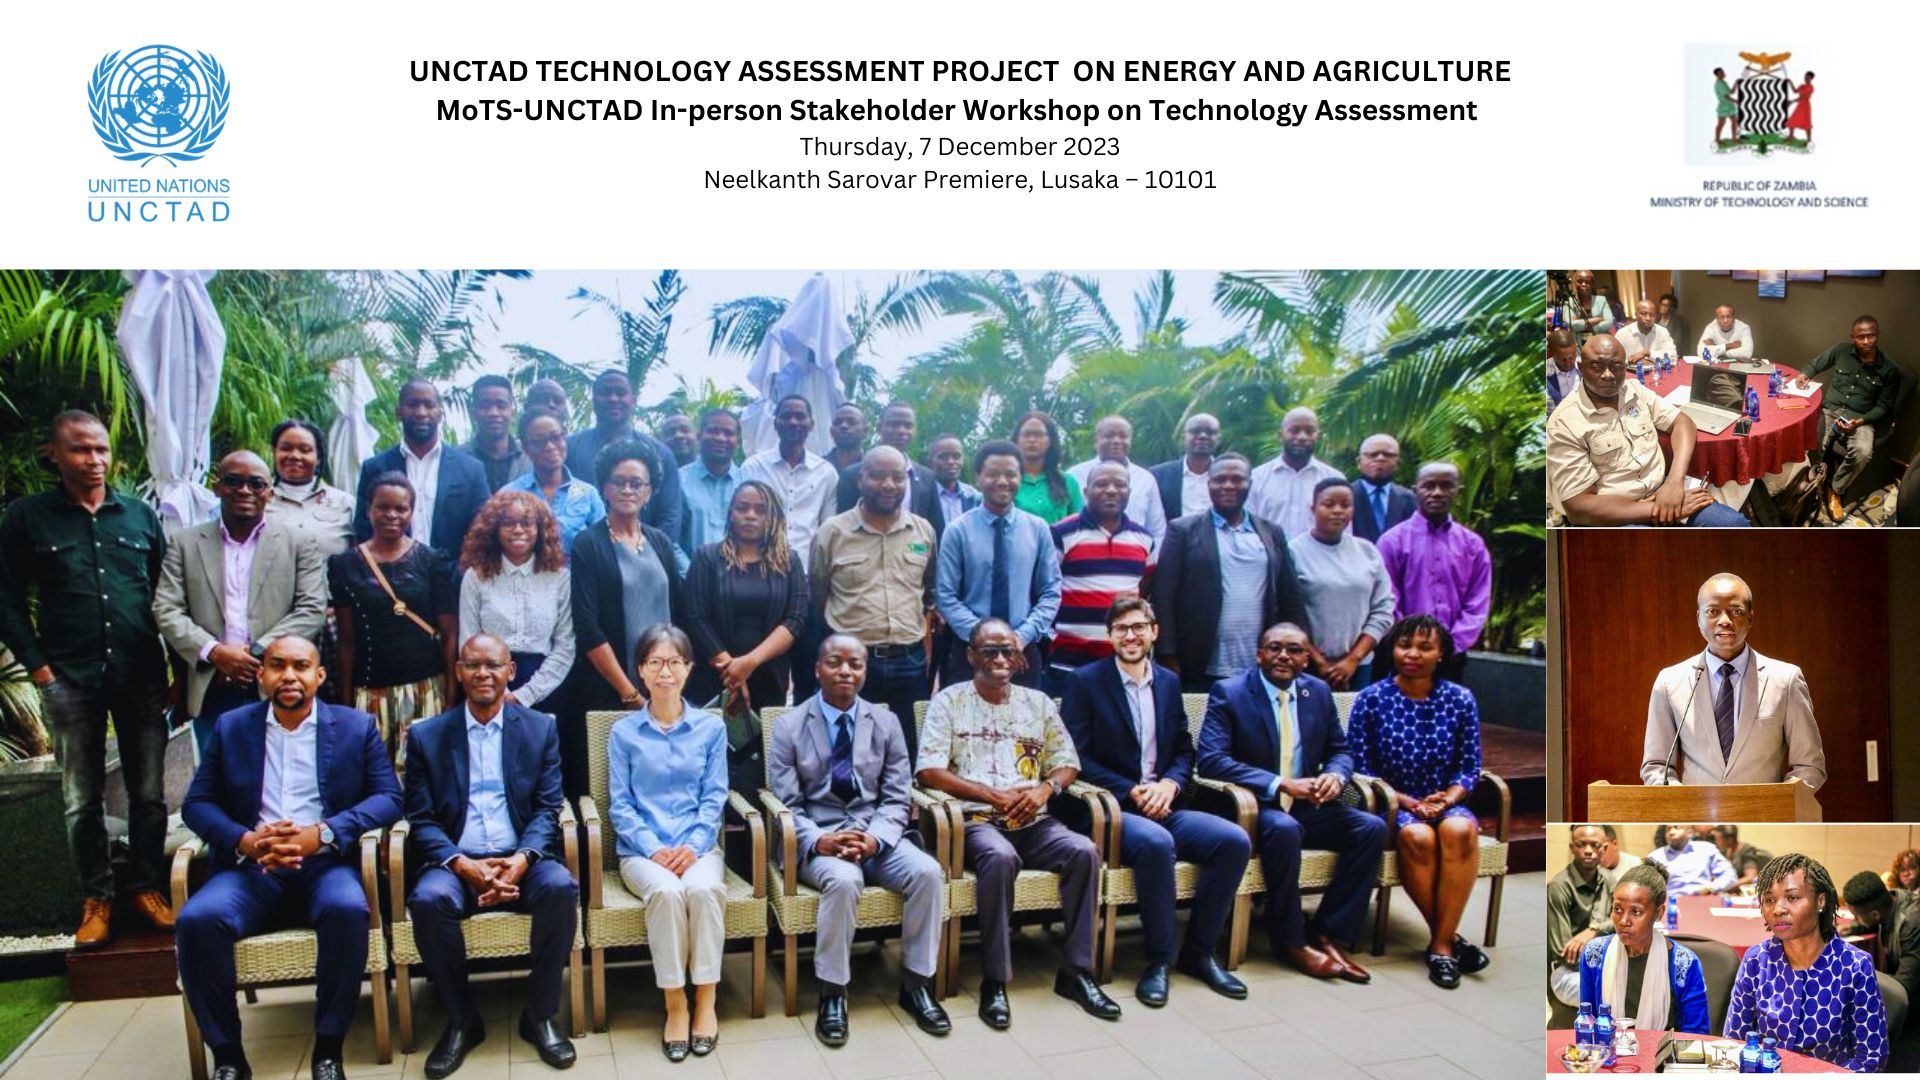 Technology Assessment In-person Stakeholder Workshop in Zambia